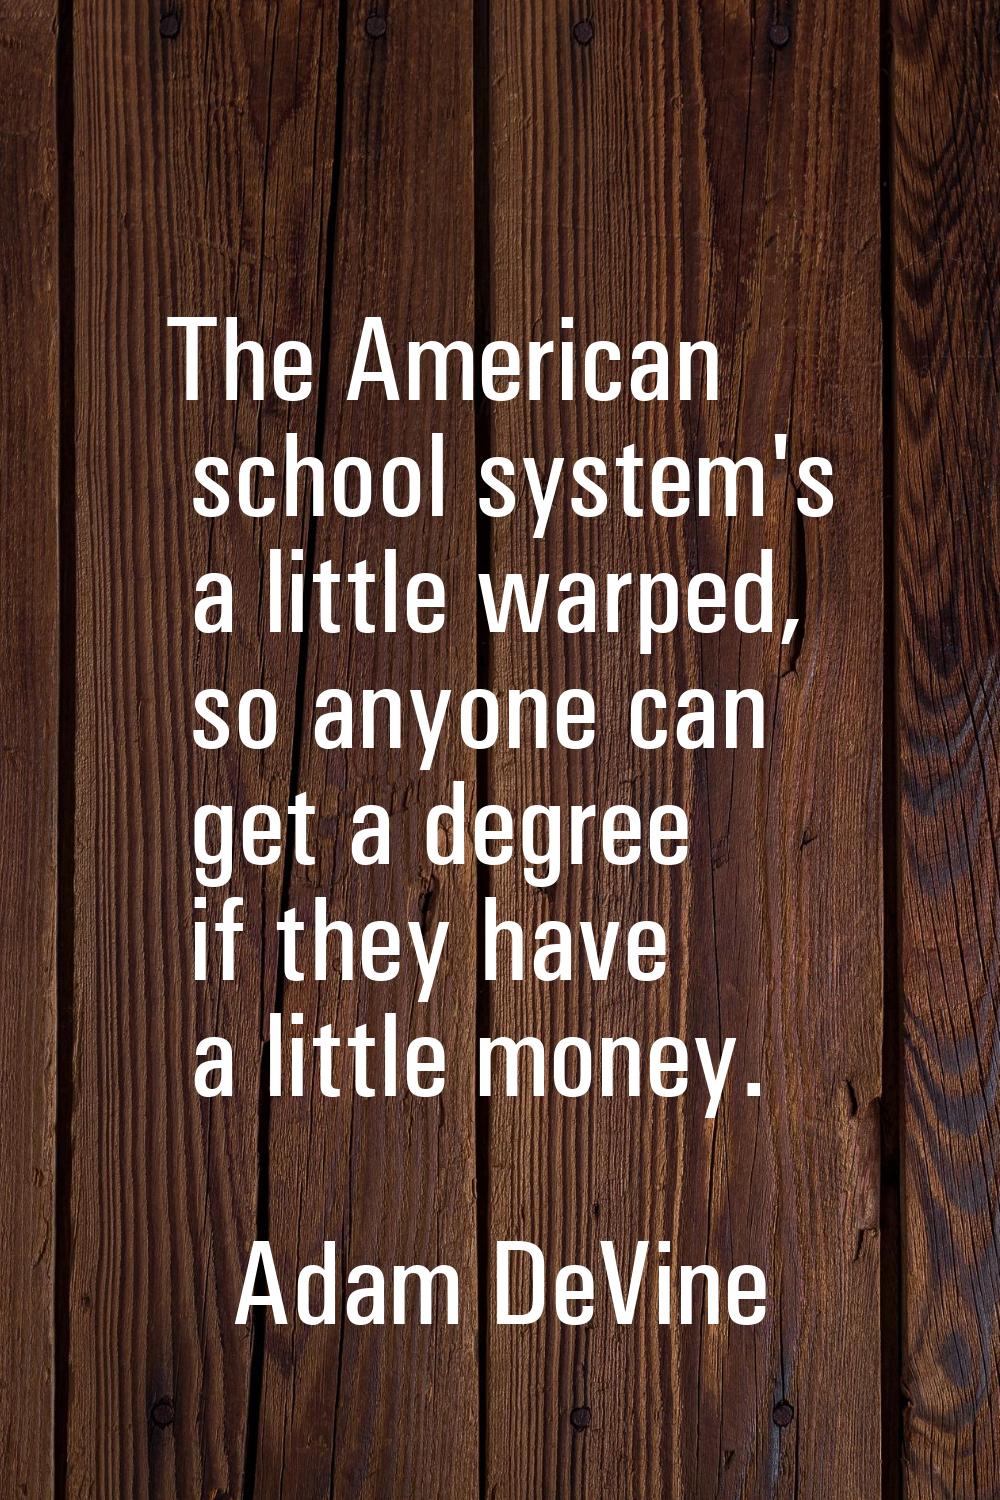 The American school system's a little warped, so anyone can get a degree if they have a little mone